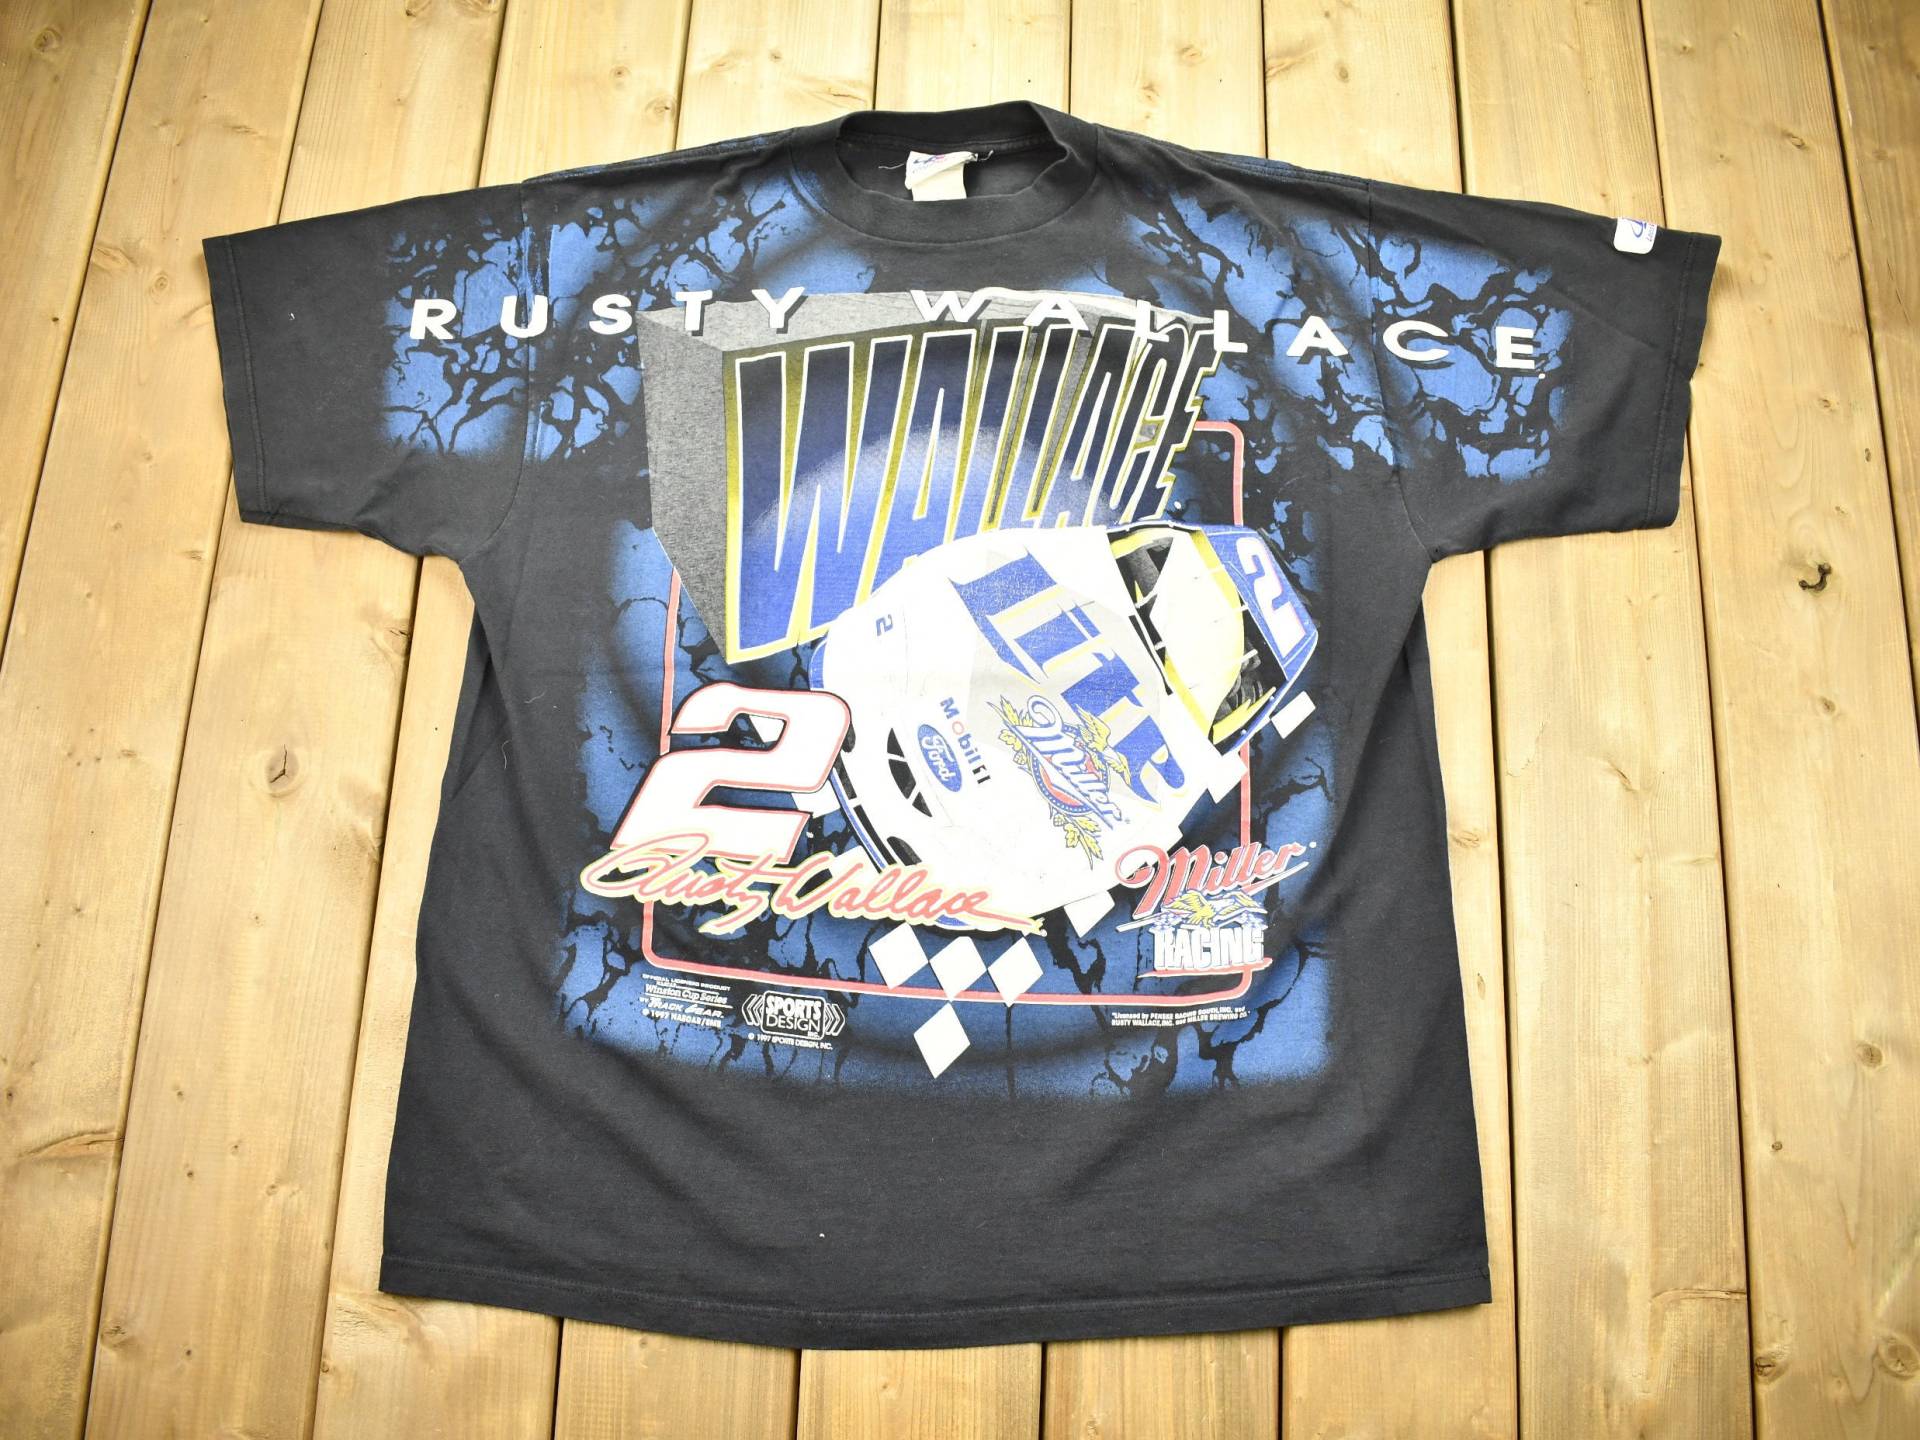 Vintage 1997 T-Shirt Rusty Wallace All Over Print Nassar/Logo Athletic Ascar Racing 90S Streetwear Athleisure von Lostboysvintage